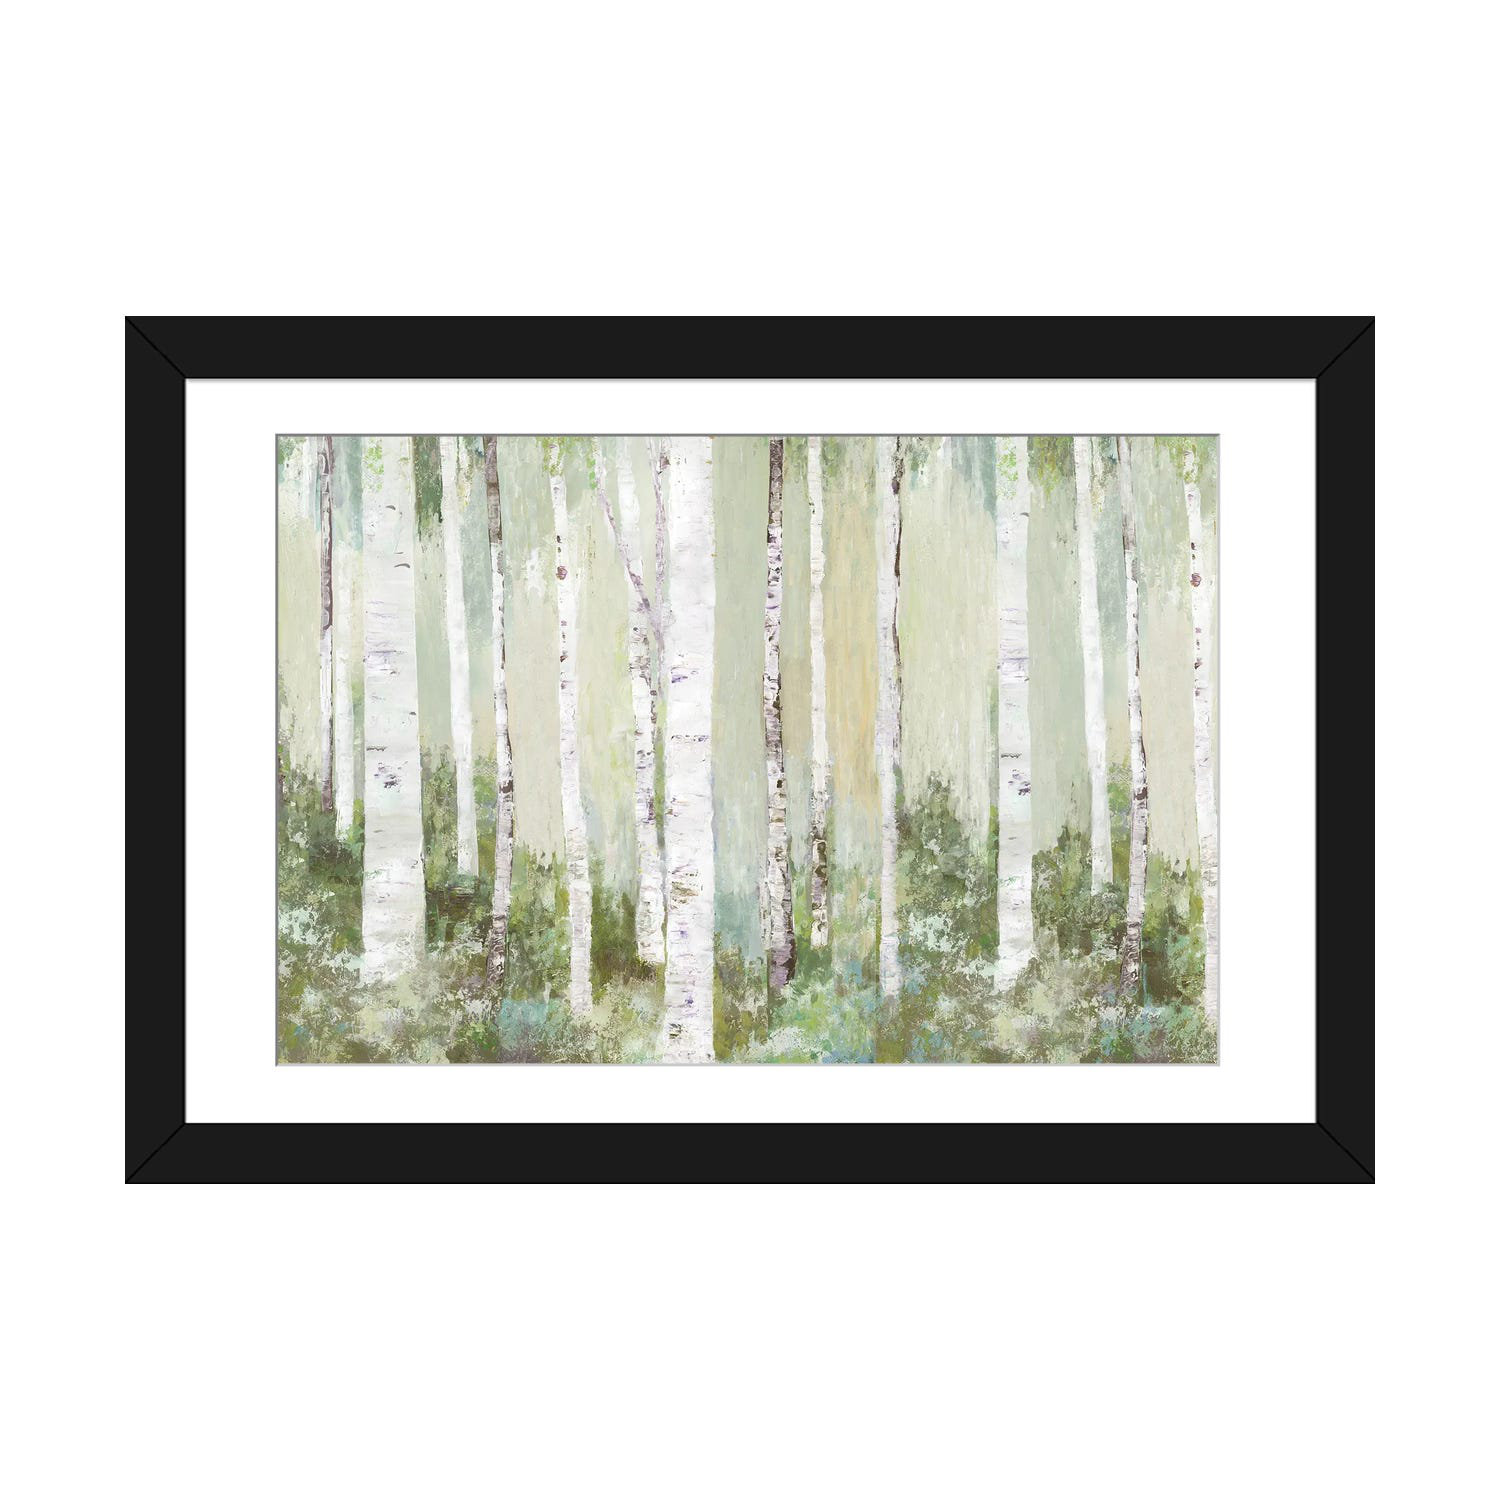 East Urban Home Tranquil Forest by Allison Pearce - Painting on Canvas ...